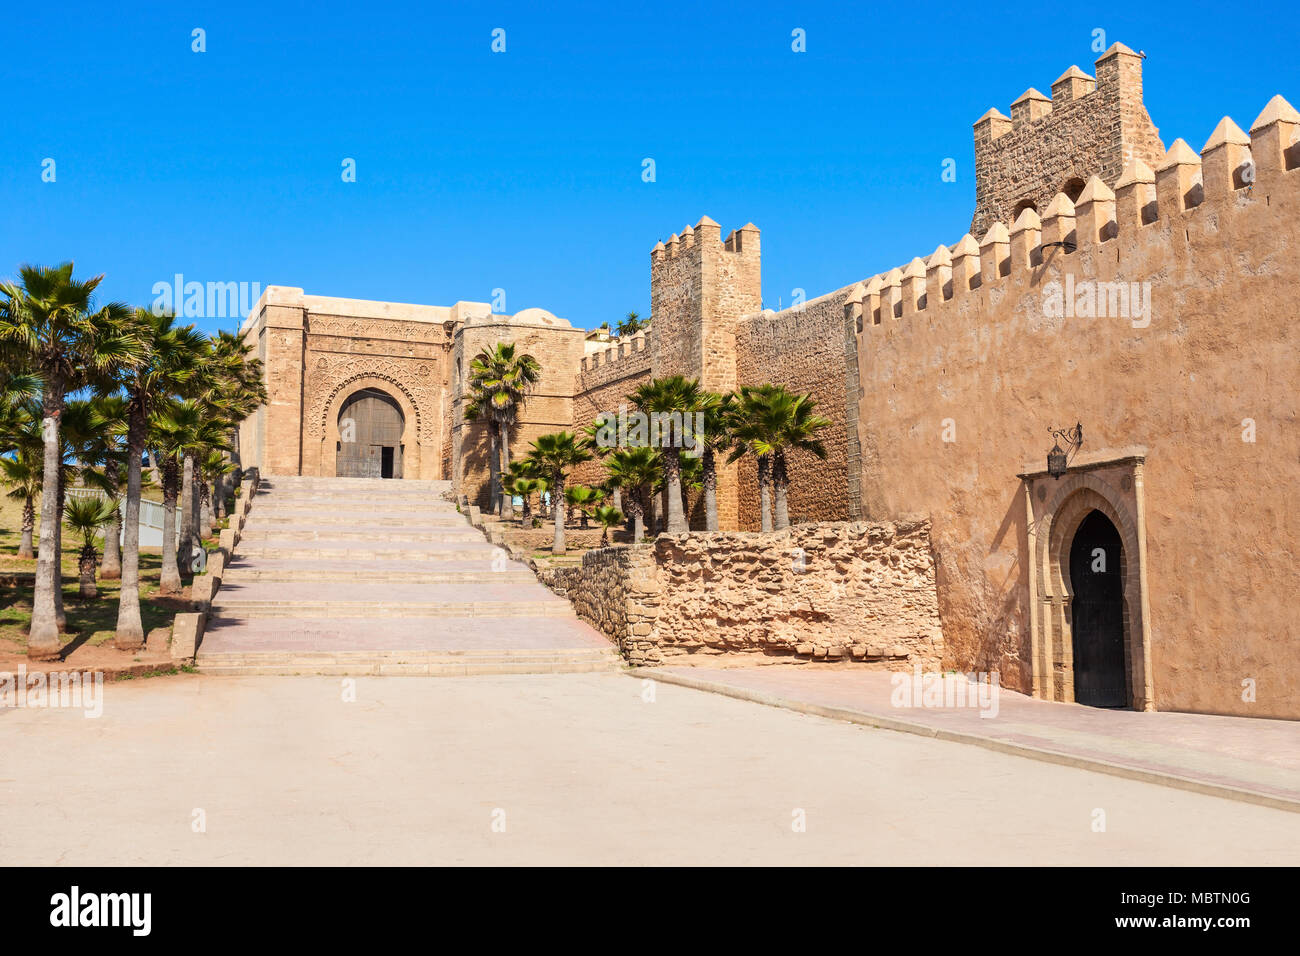 The Kasbah of the Udayas fortress in Rabat in Morocco. The Kasbah of the  Udayas is located at the mouth of the Bou Regreg river in Rabat, Morocco.  Rab Stock Photo -